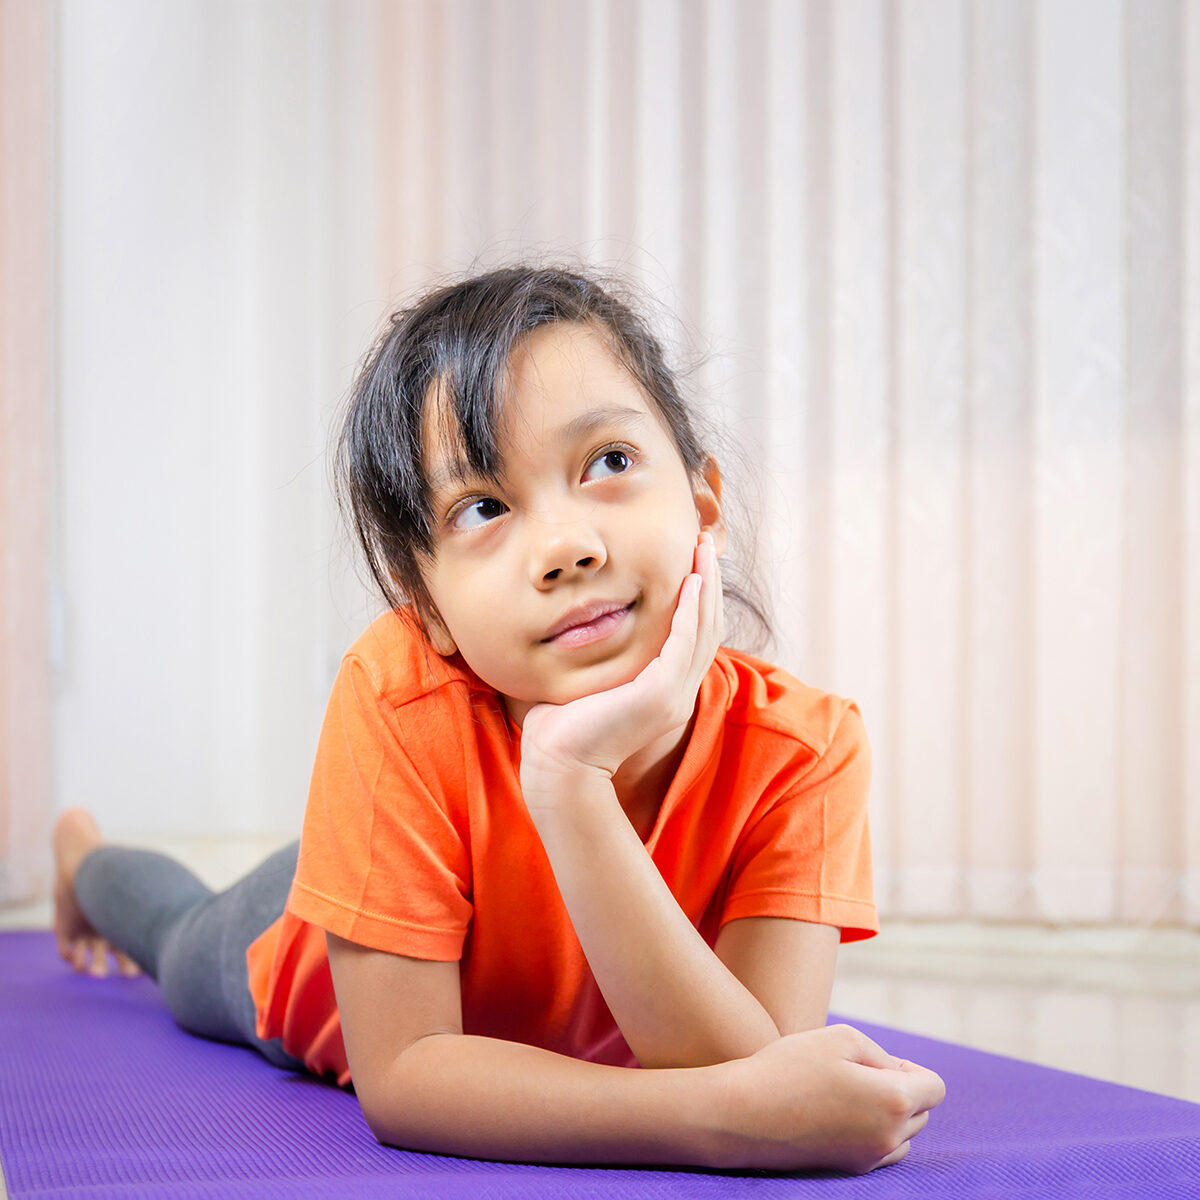 Cheerful little cute girl smiling and thinking on the yoga mats, Happiness kid concept